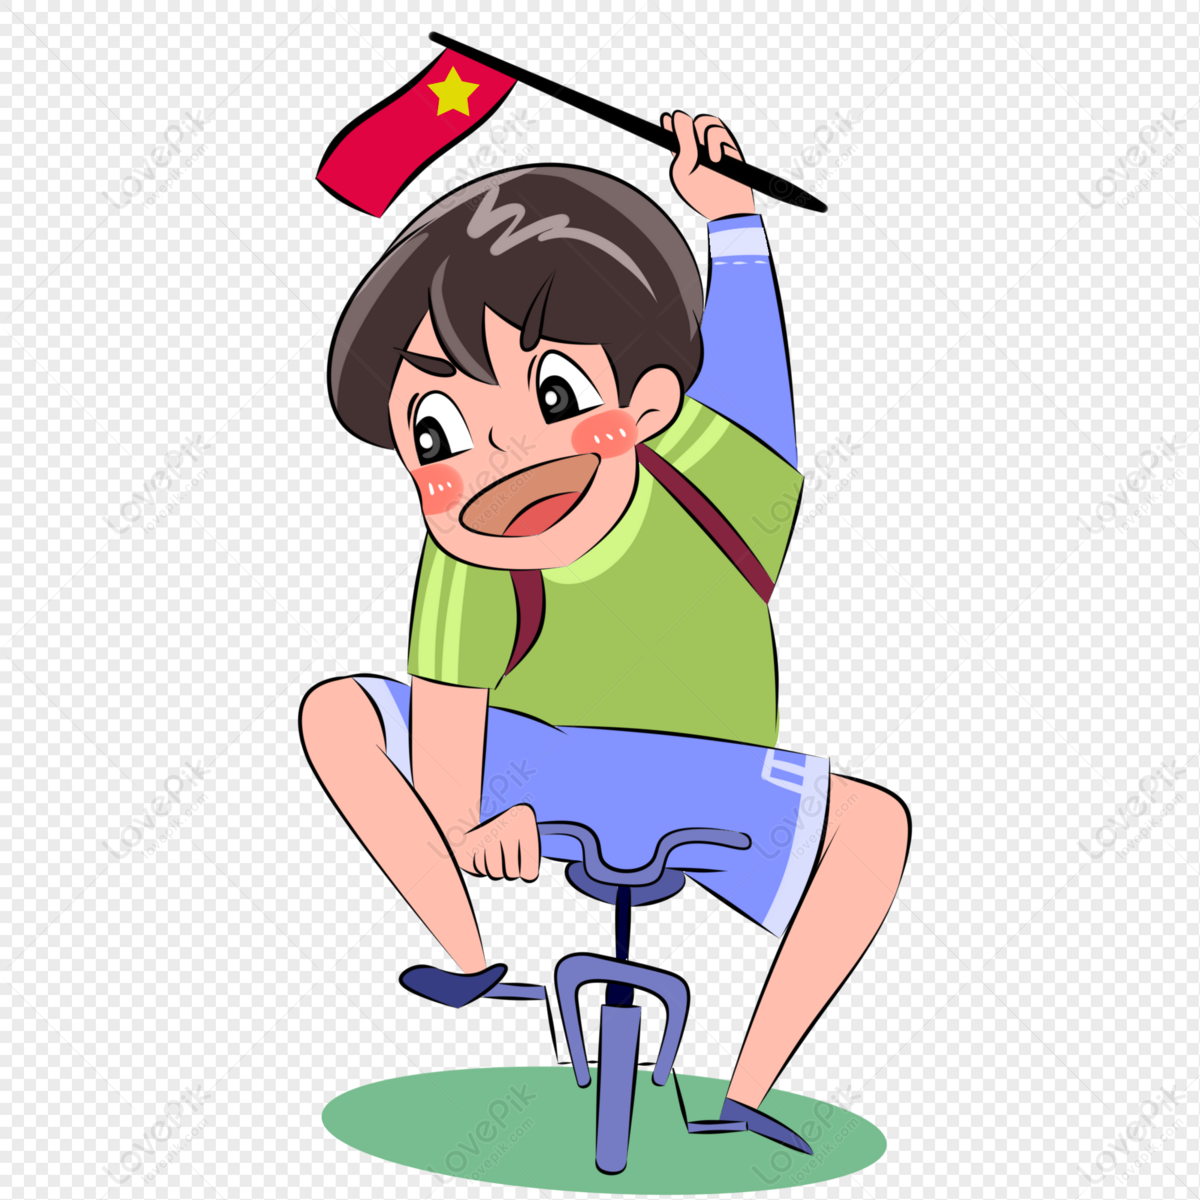 Cartoon Character Holding A Small Bicycle Riding A Bicycle PNG Transparent  Image And Clipart Image For Free Download - Lovepik | 401452567